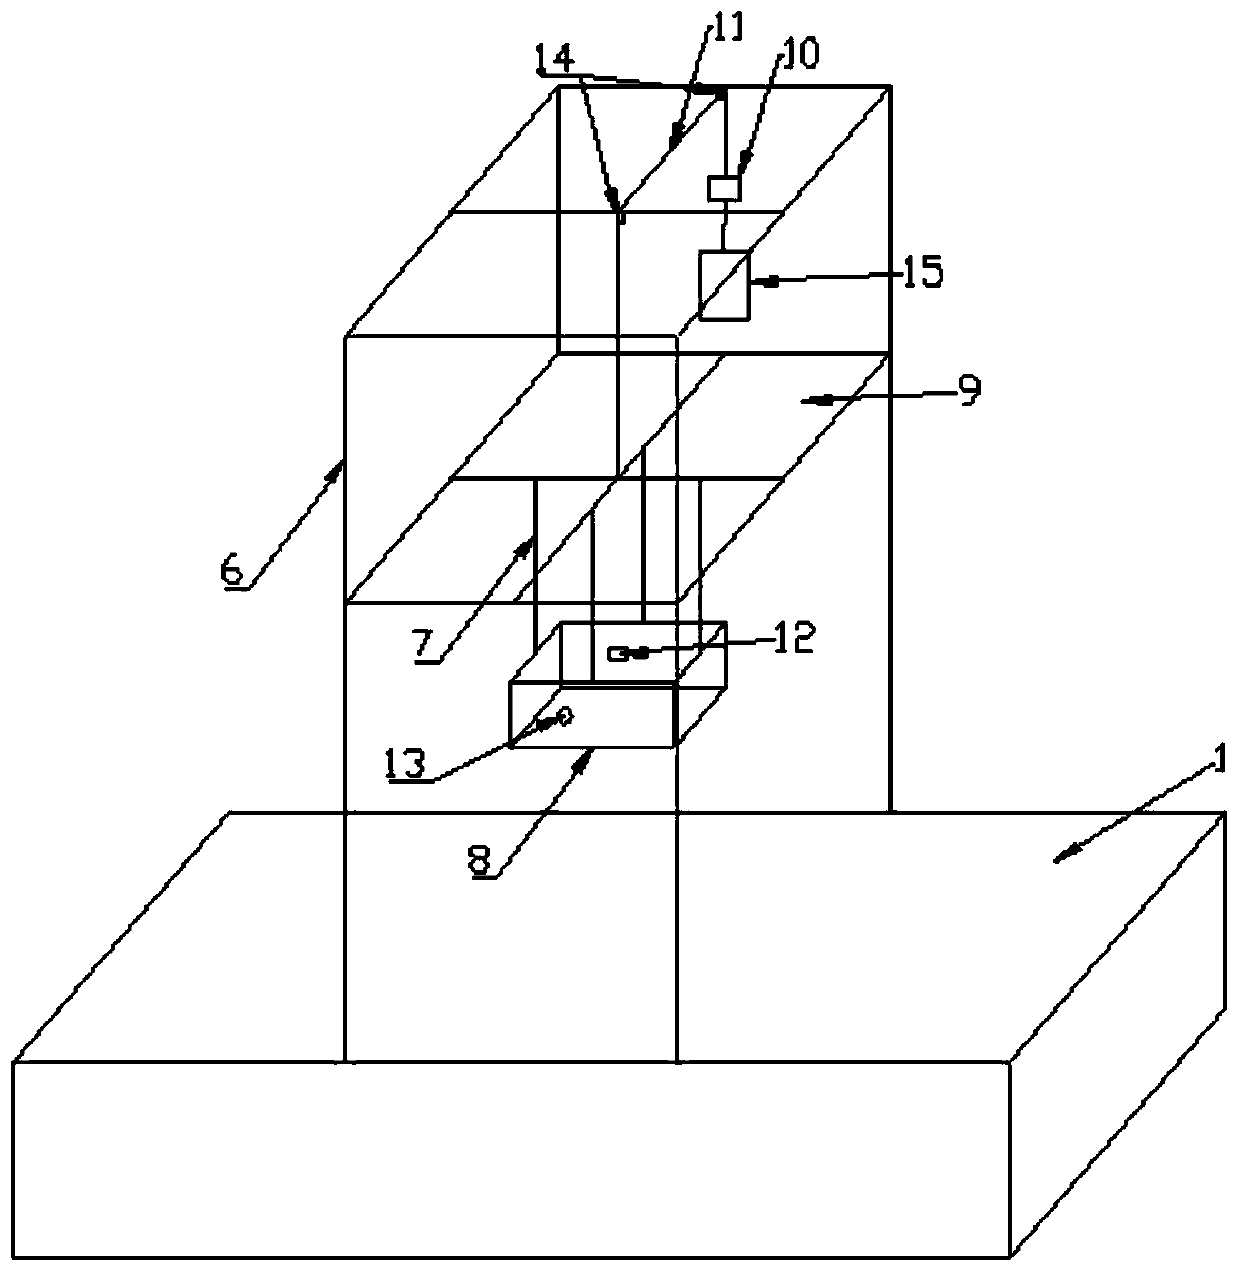 Model vertical water entry test device and test method